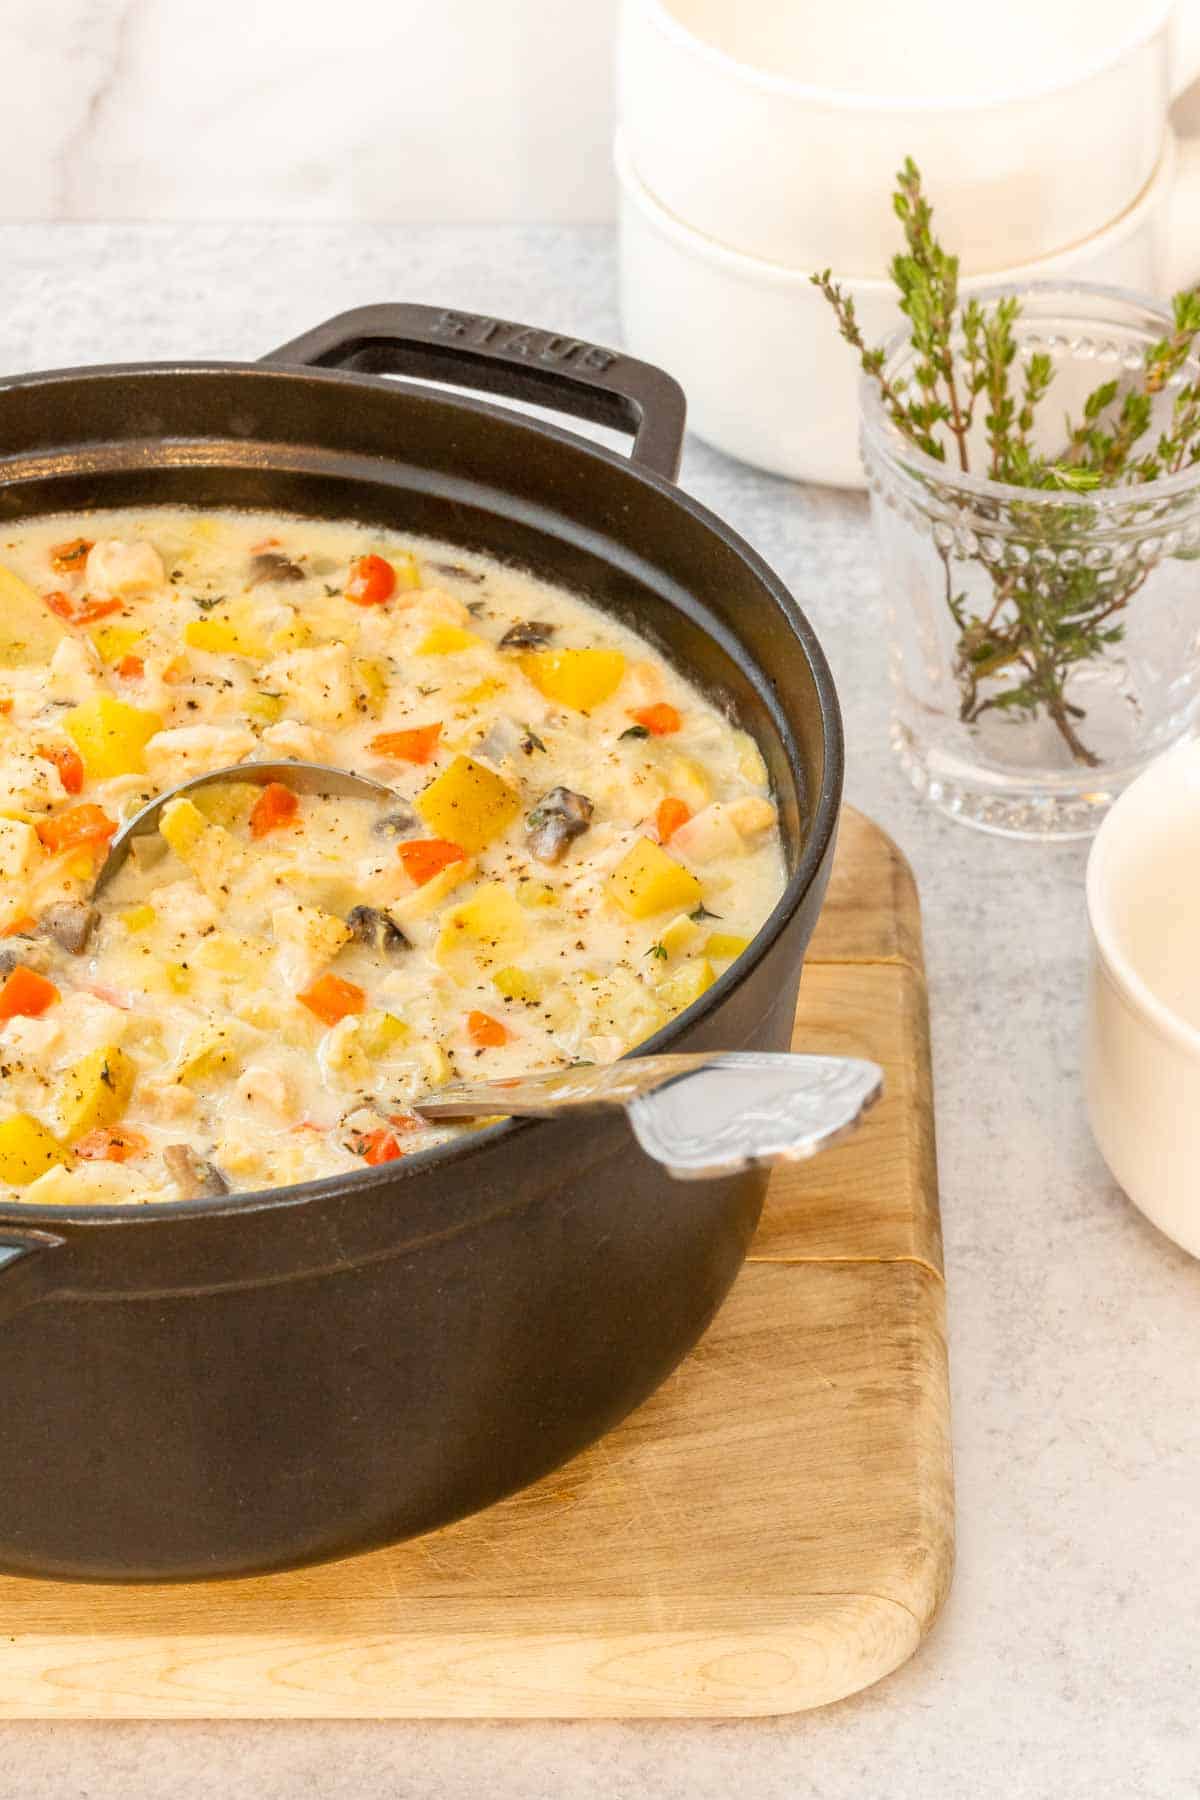 Large black stock pot holding Creamy Artichoke Chicken Chowder, with a bowl and fresh thyme alongside